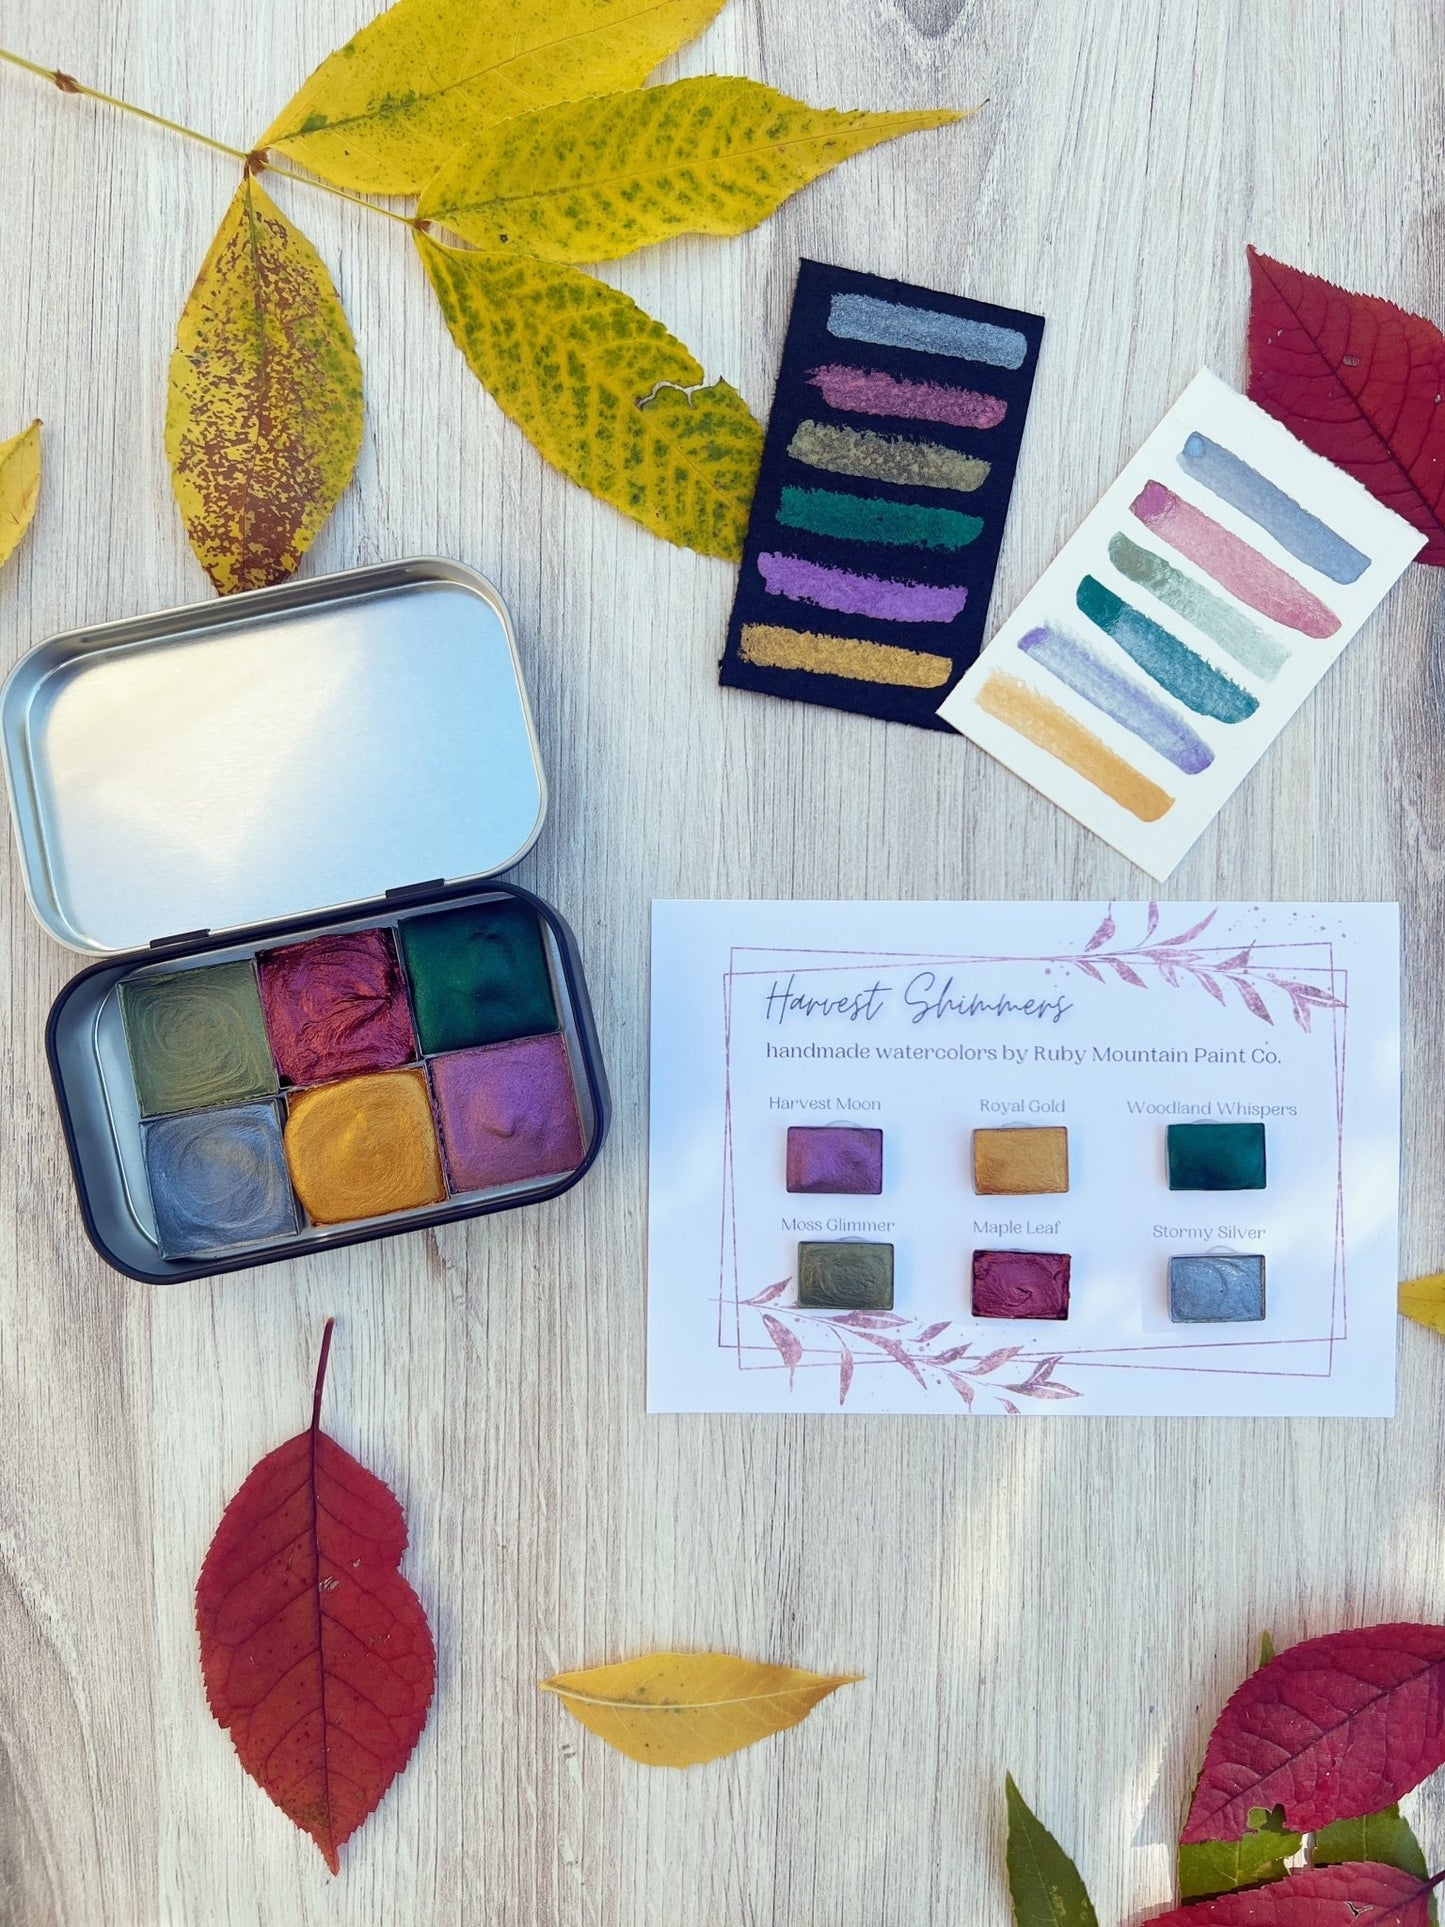 Harvest Shimmers, a palette of six shimmery watercolors